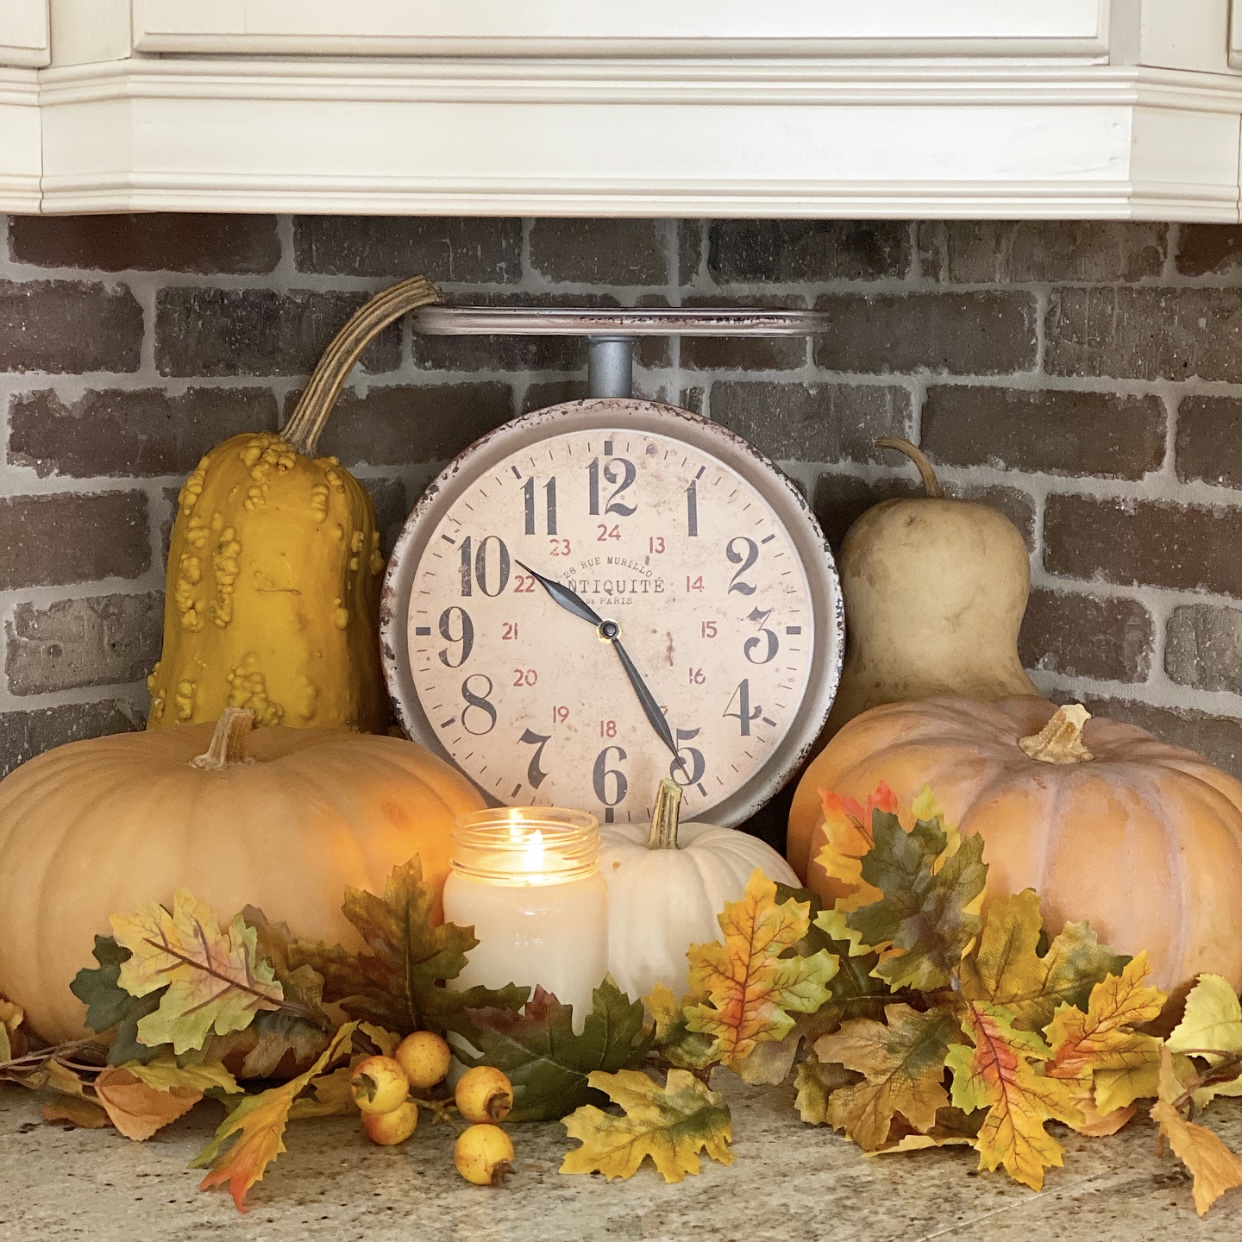 Clock, pumpkins, candle and leaves making a vignette on the kitchen counter in a corner.